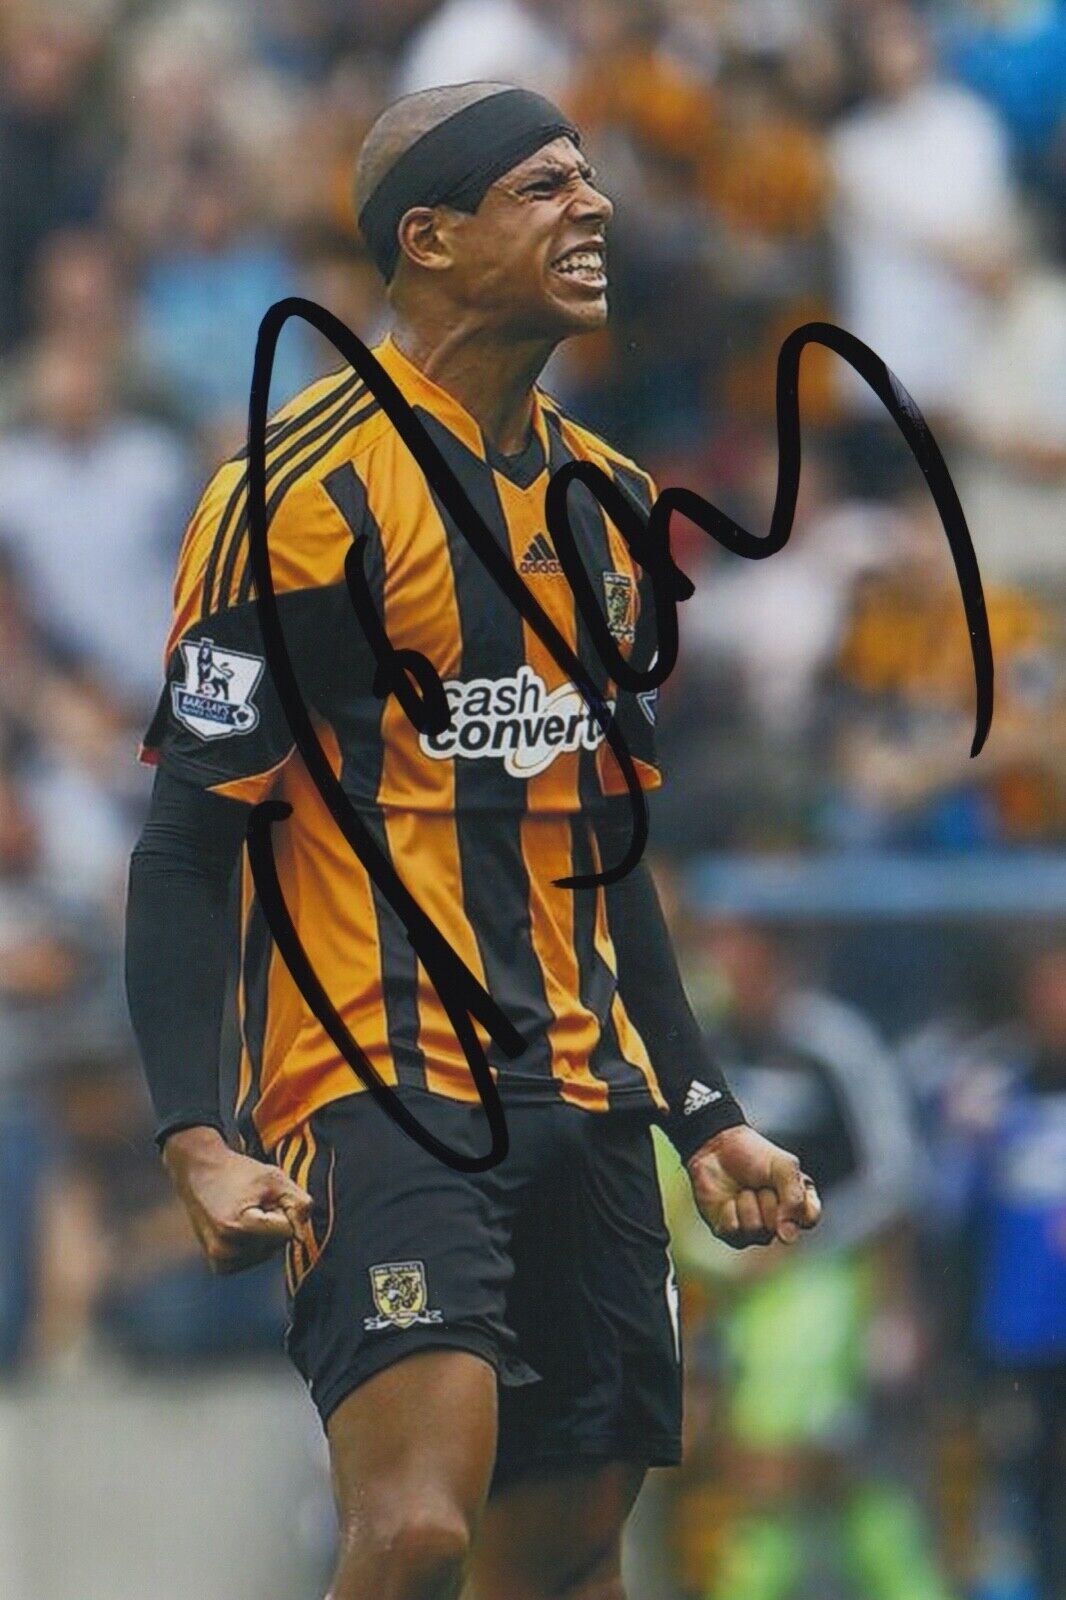 CURTIS DAVIES HAND SIGNED 6X4 Photo Poster painting - FOOTBALL AUTOGRAPH - HULL CITY 1.